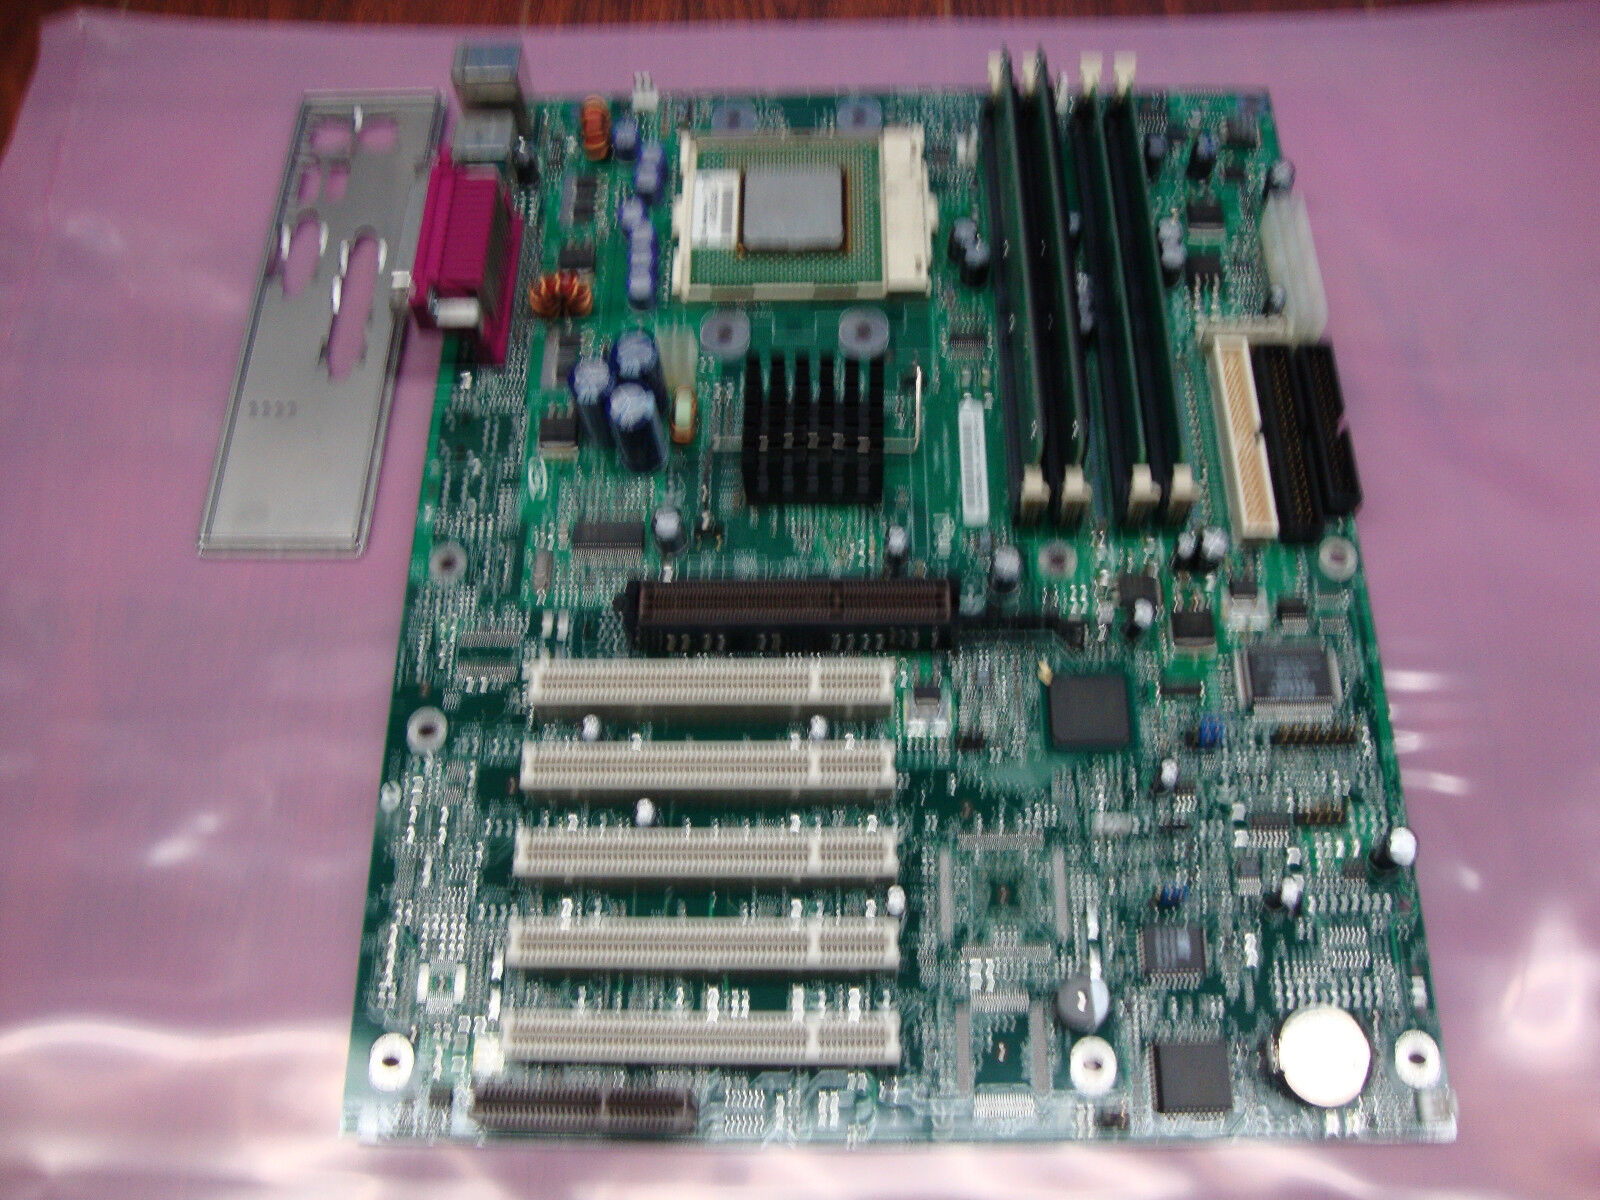 INTEL A48535-903 MOTHERBOARD COMBO PENTIUM 4 1.4GHz 256MB